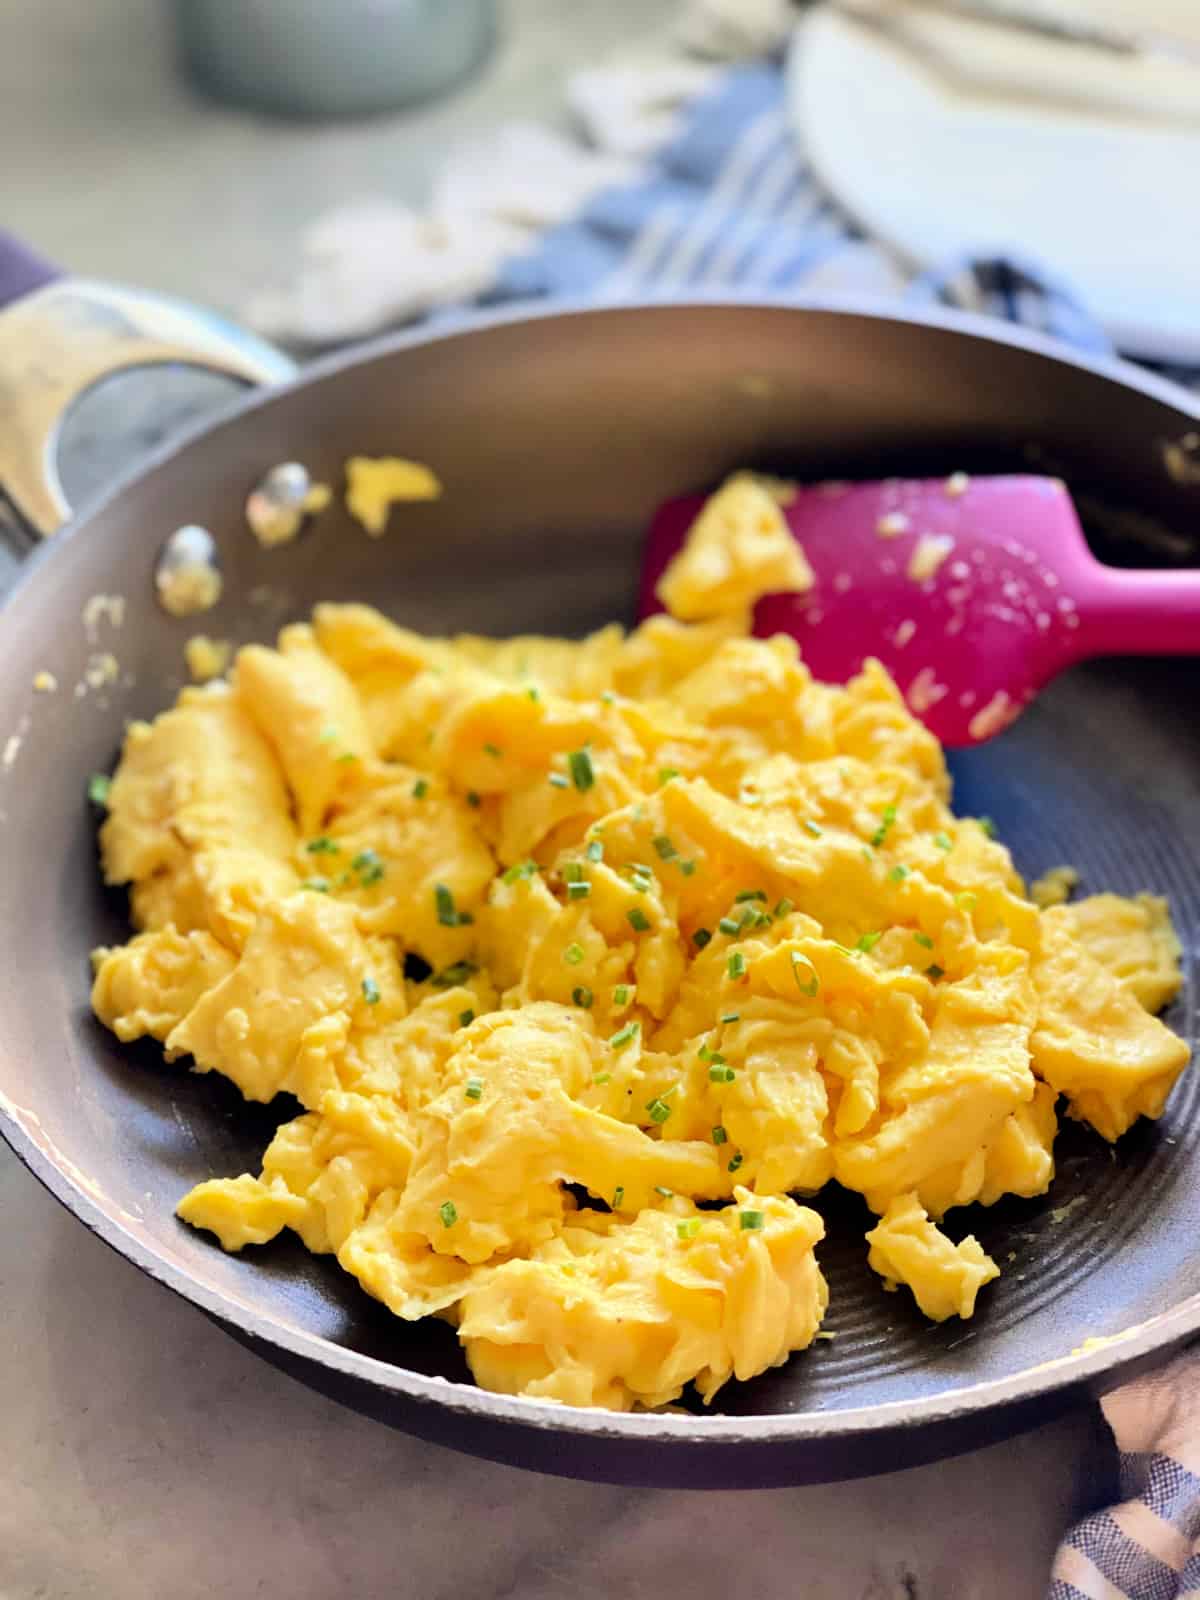 Brown frying pan with fluffy scrambled eggs topped with chives on a blue and white striped cloth.